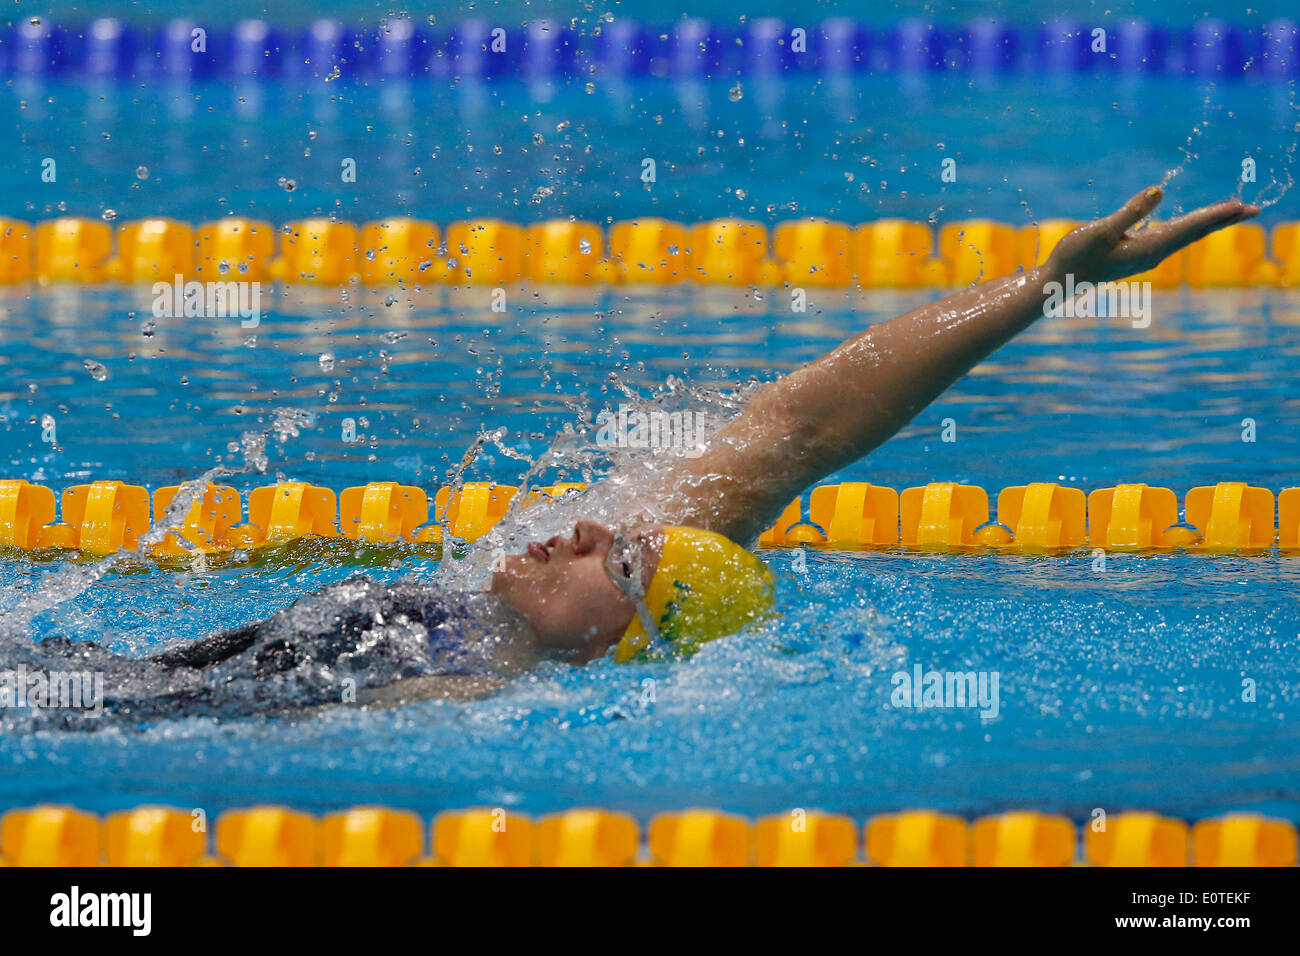 Jacqueline Freney of Australia on her way to win the gold during the women's 200m IM - SM7 final swimming session competition held at the Aquatics Center during the London 2012 Paralympic Games in London, Britain, 02 September 2012. Stock Photo